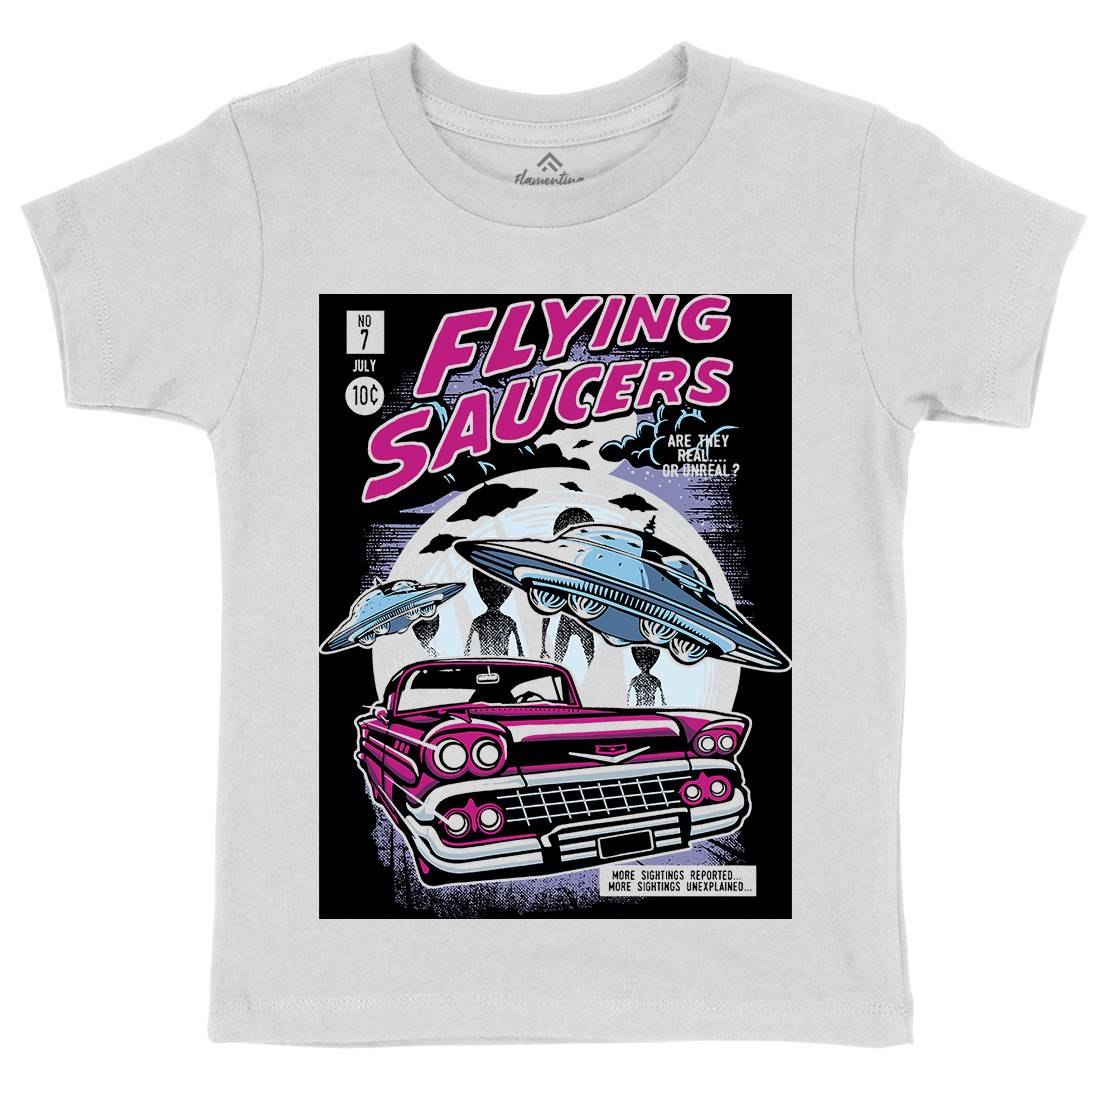 Flying Saucers Kids Crew Neck T-Shirt Space A531